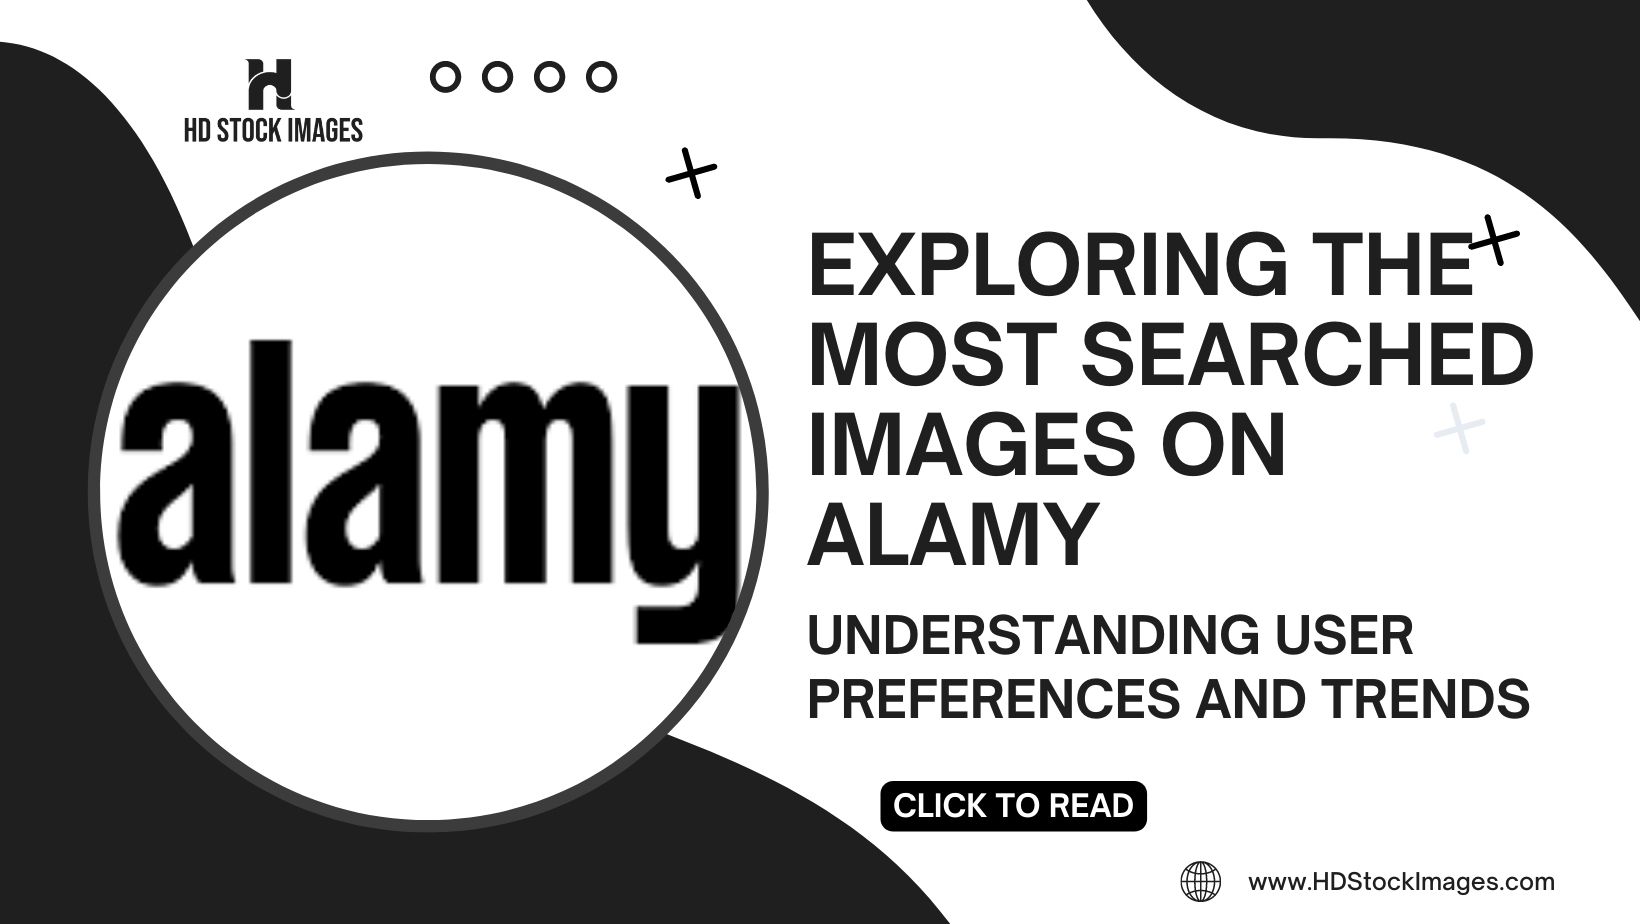 Exploring the Most Searched Images on Alamy: Understanding User Preferences and Trends